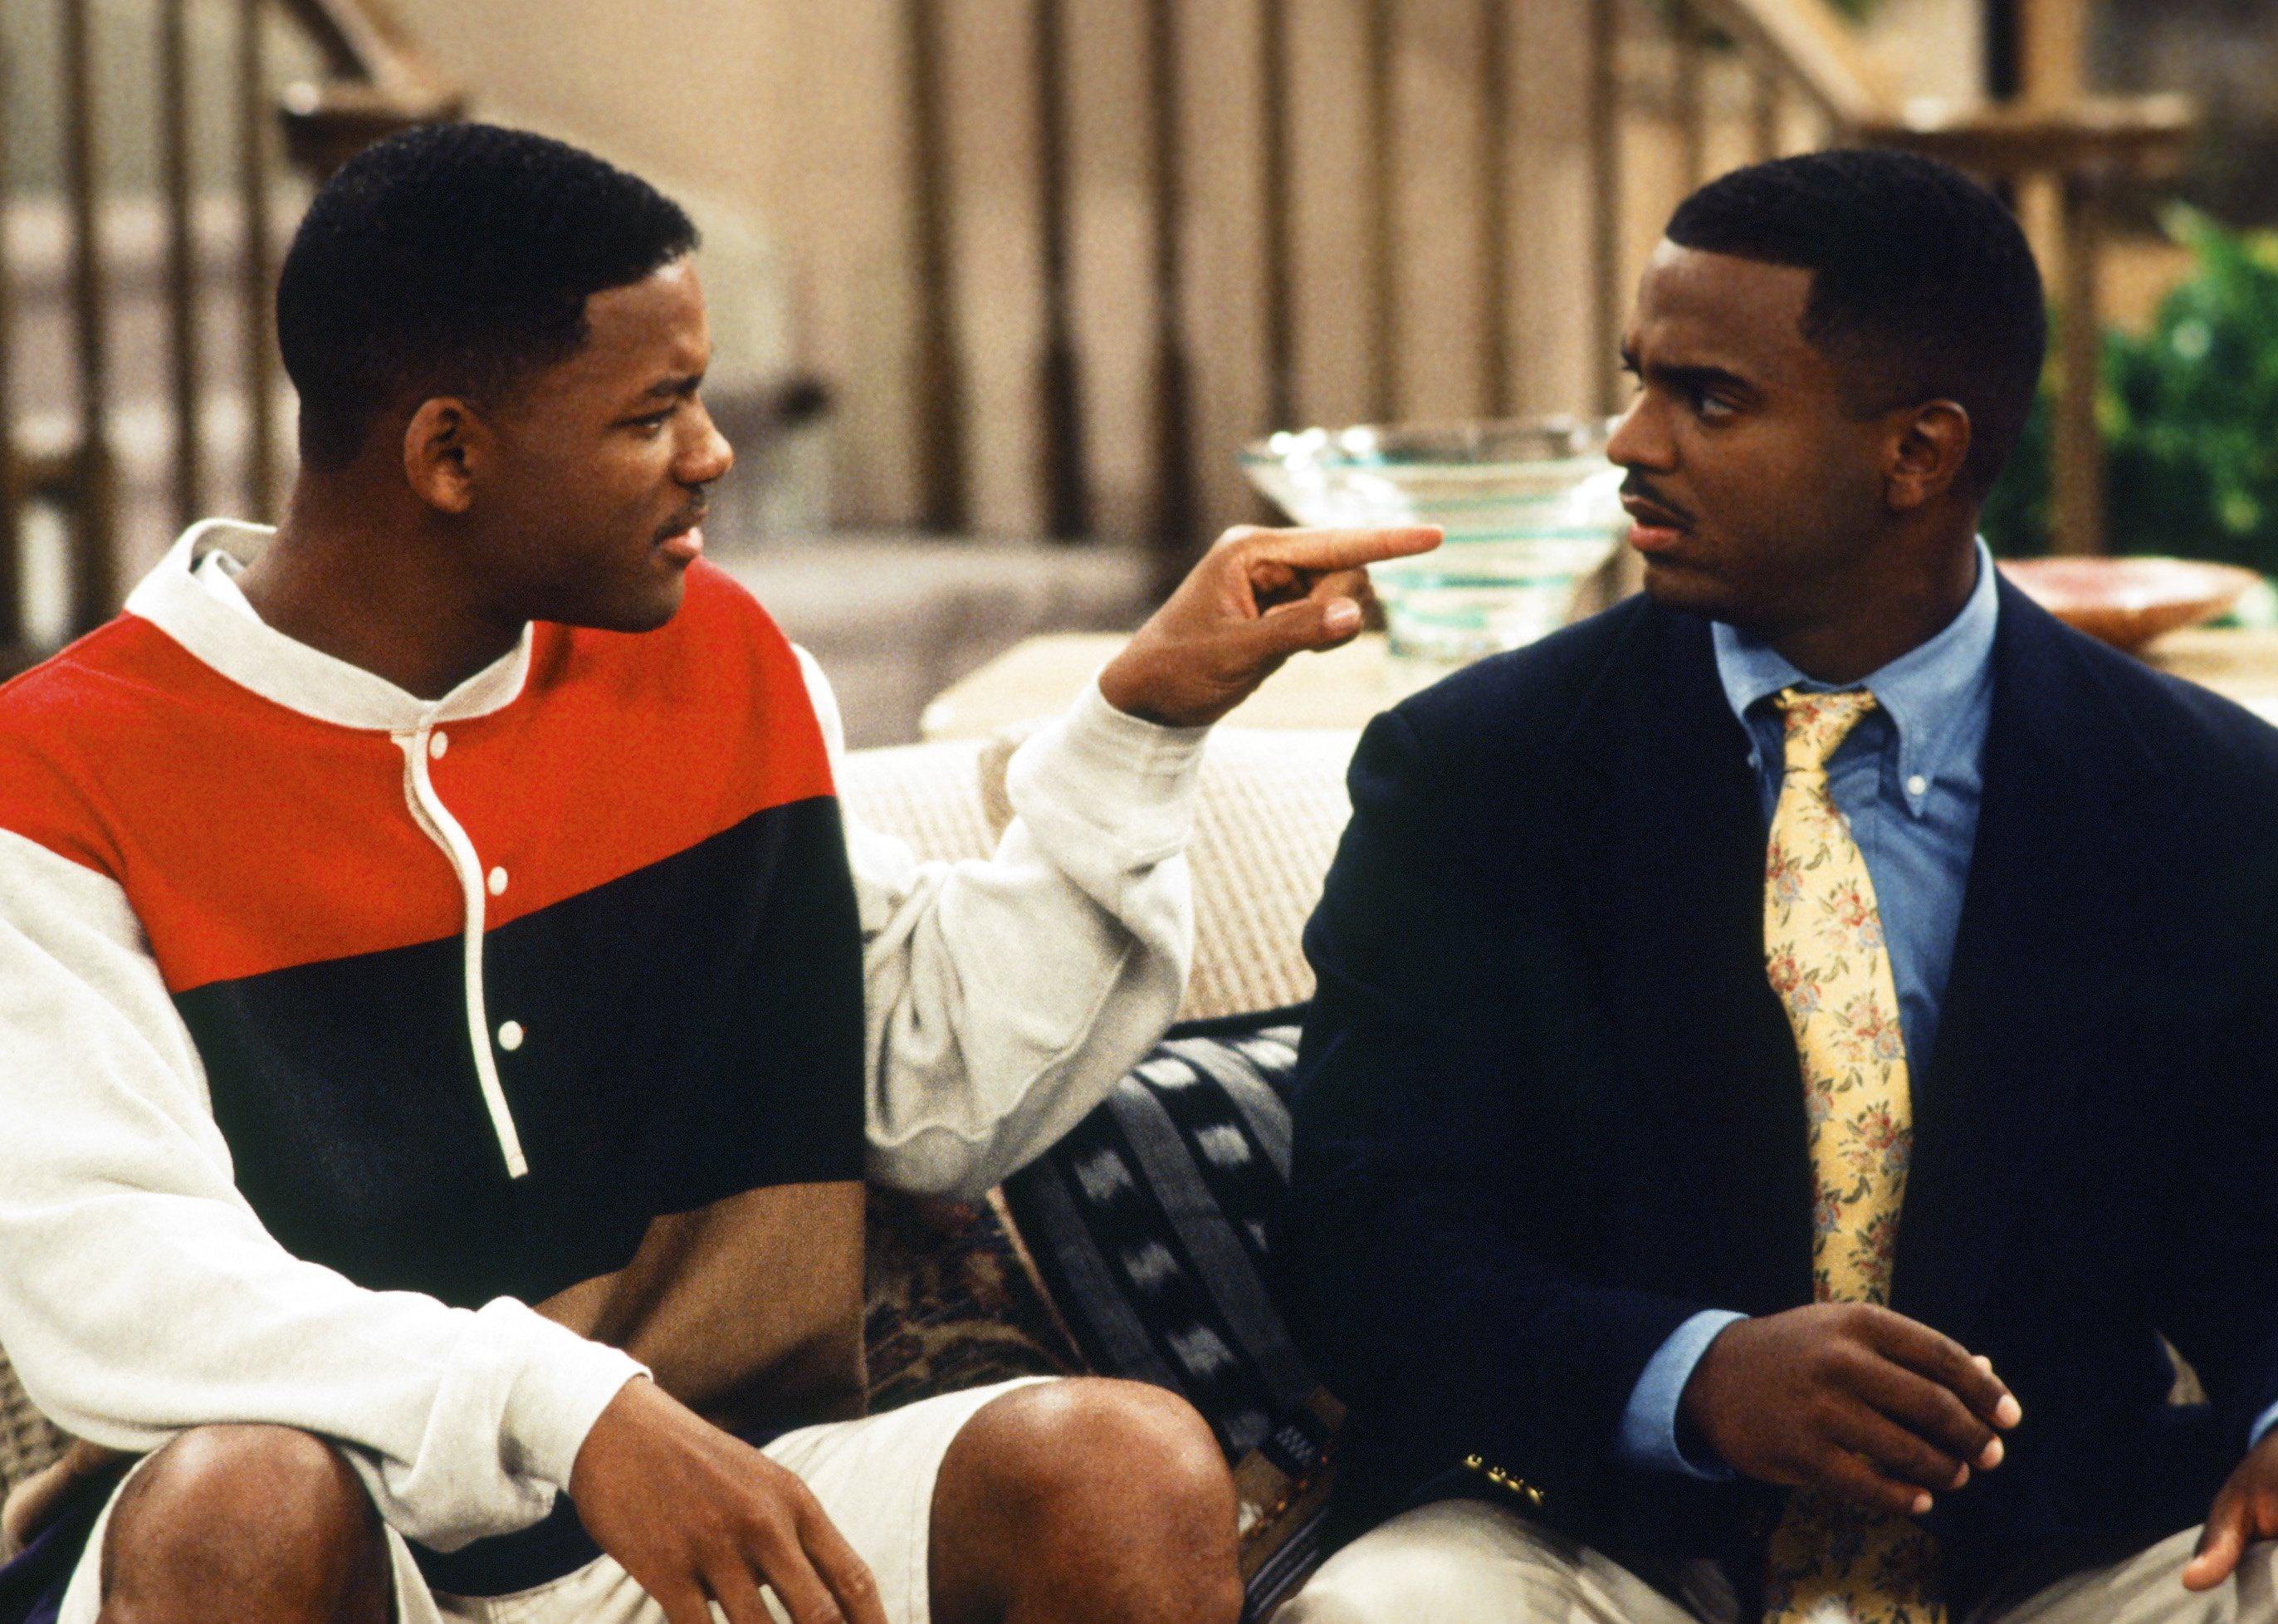 Will Smith pointing at Alfonso Ribeiro on a couch.